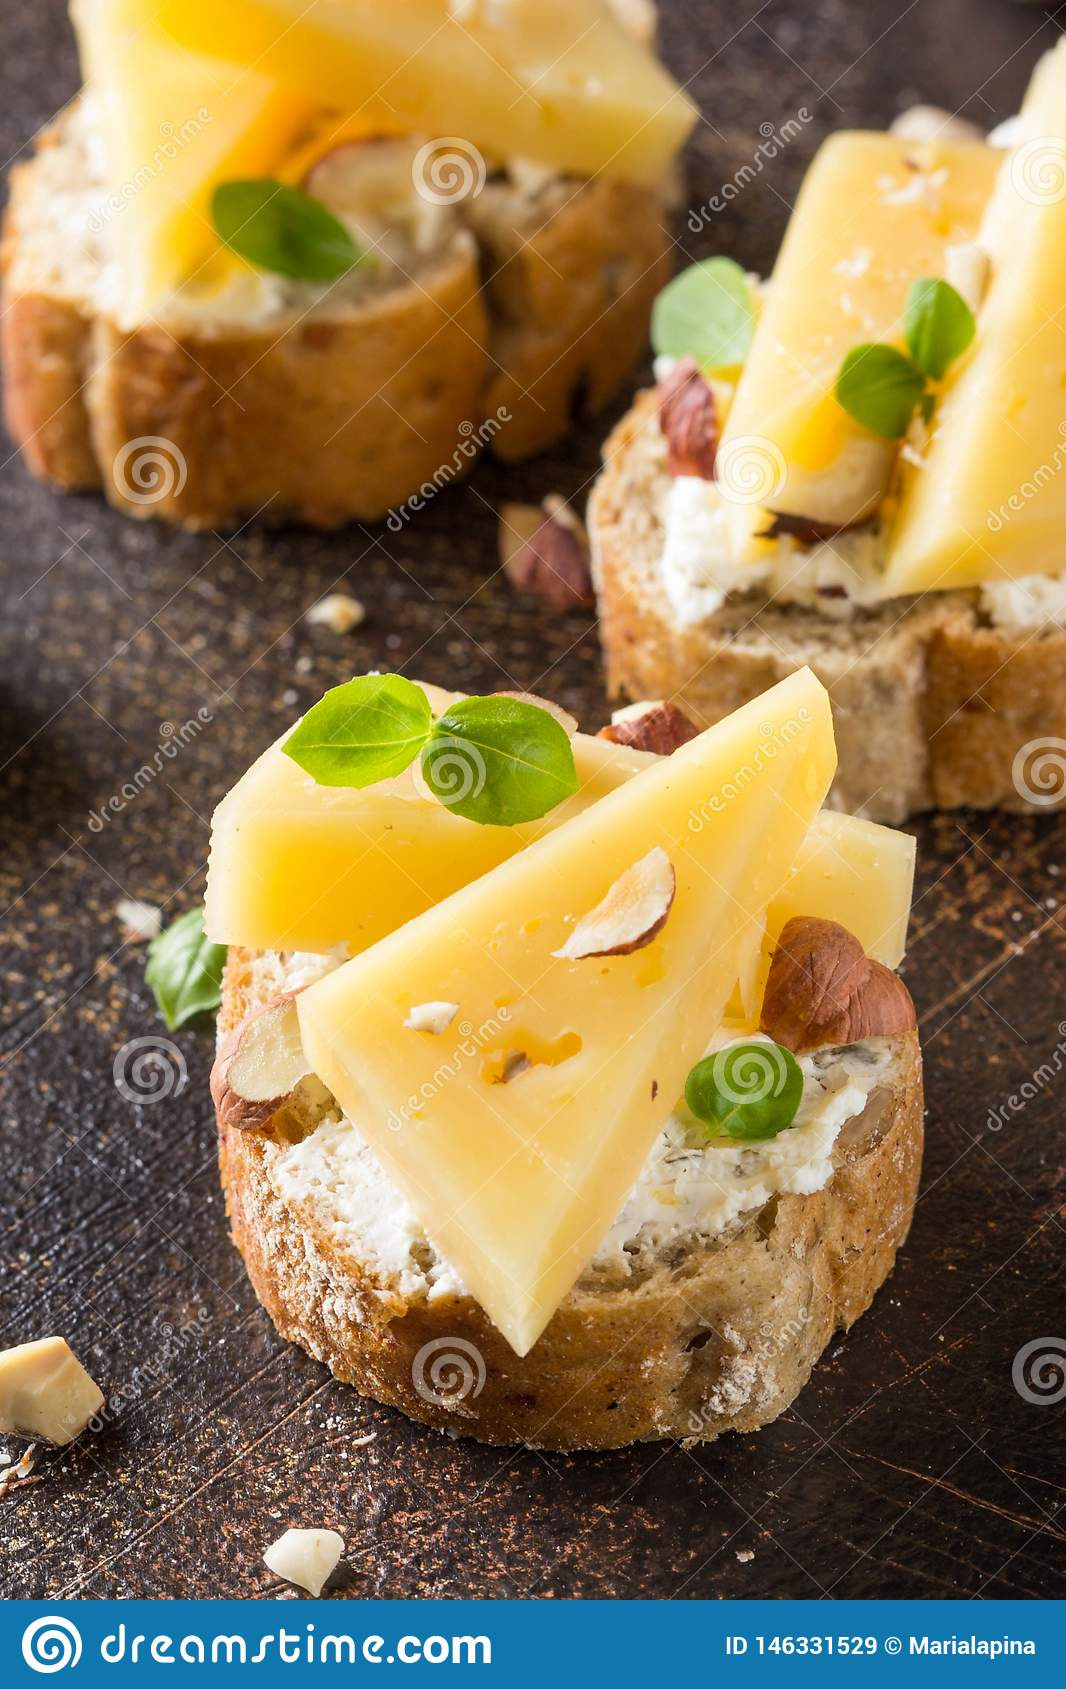 Vegetarian Gourmet Appetizers
 Canapes Bread With Cheese Hazelnuts Basil Delicious